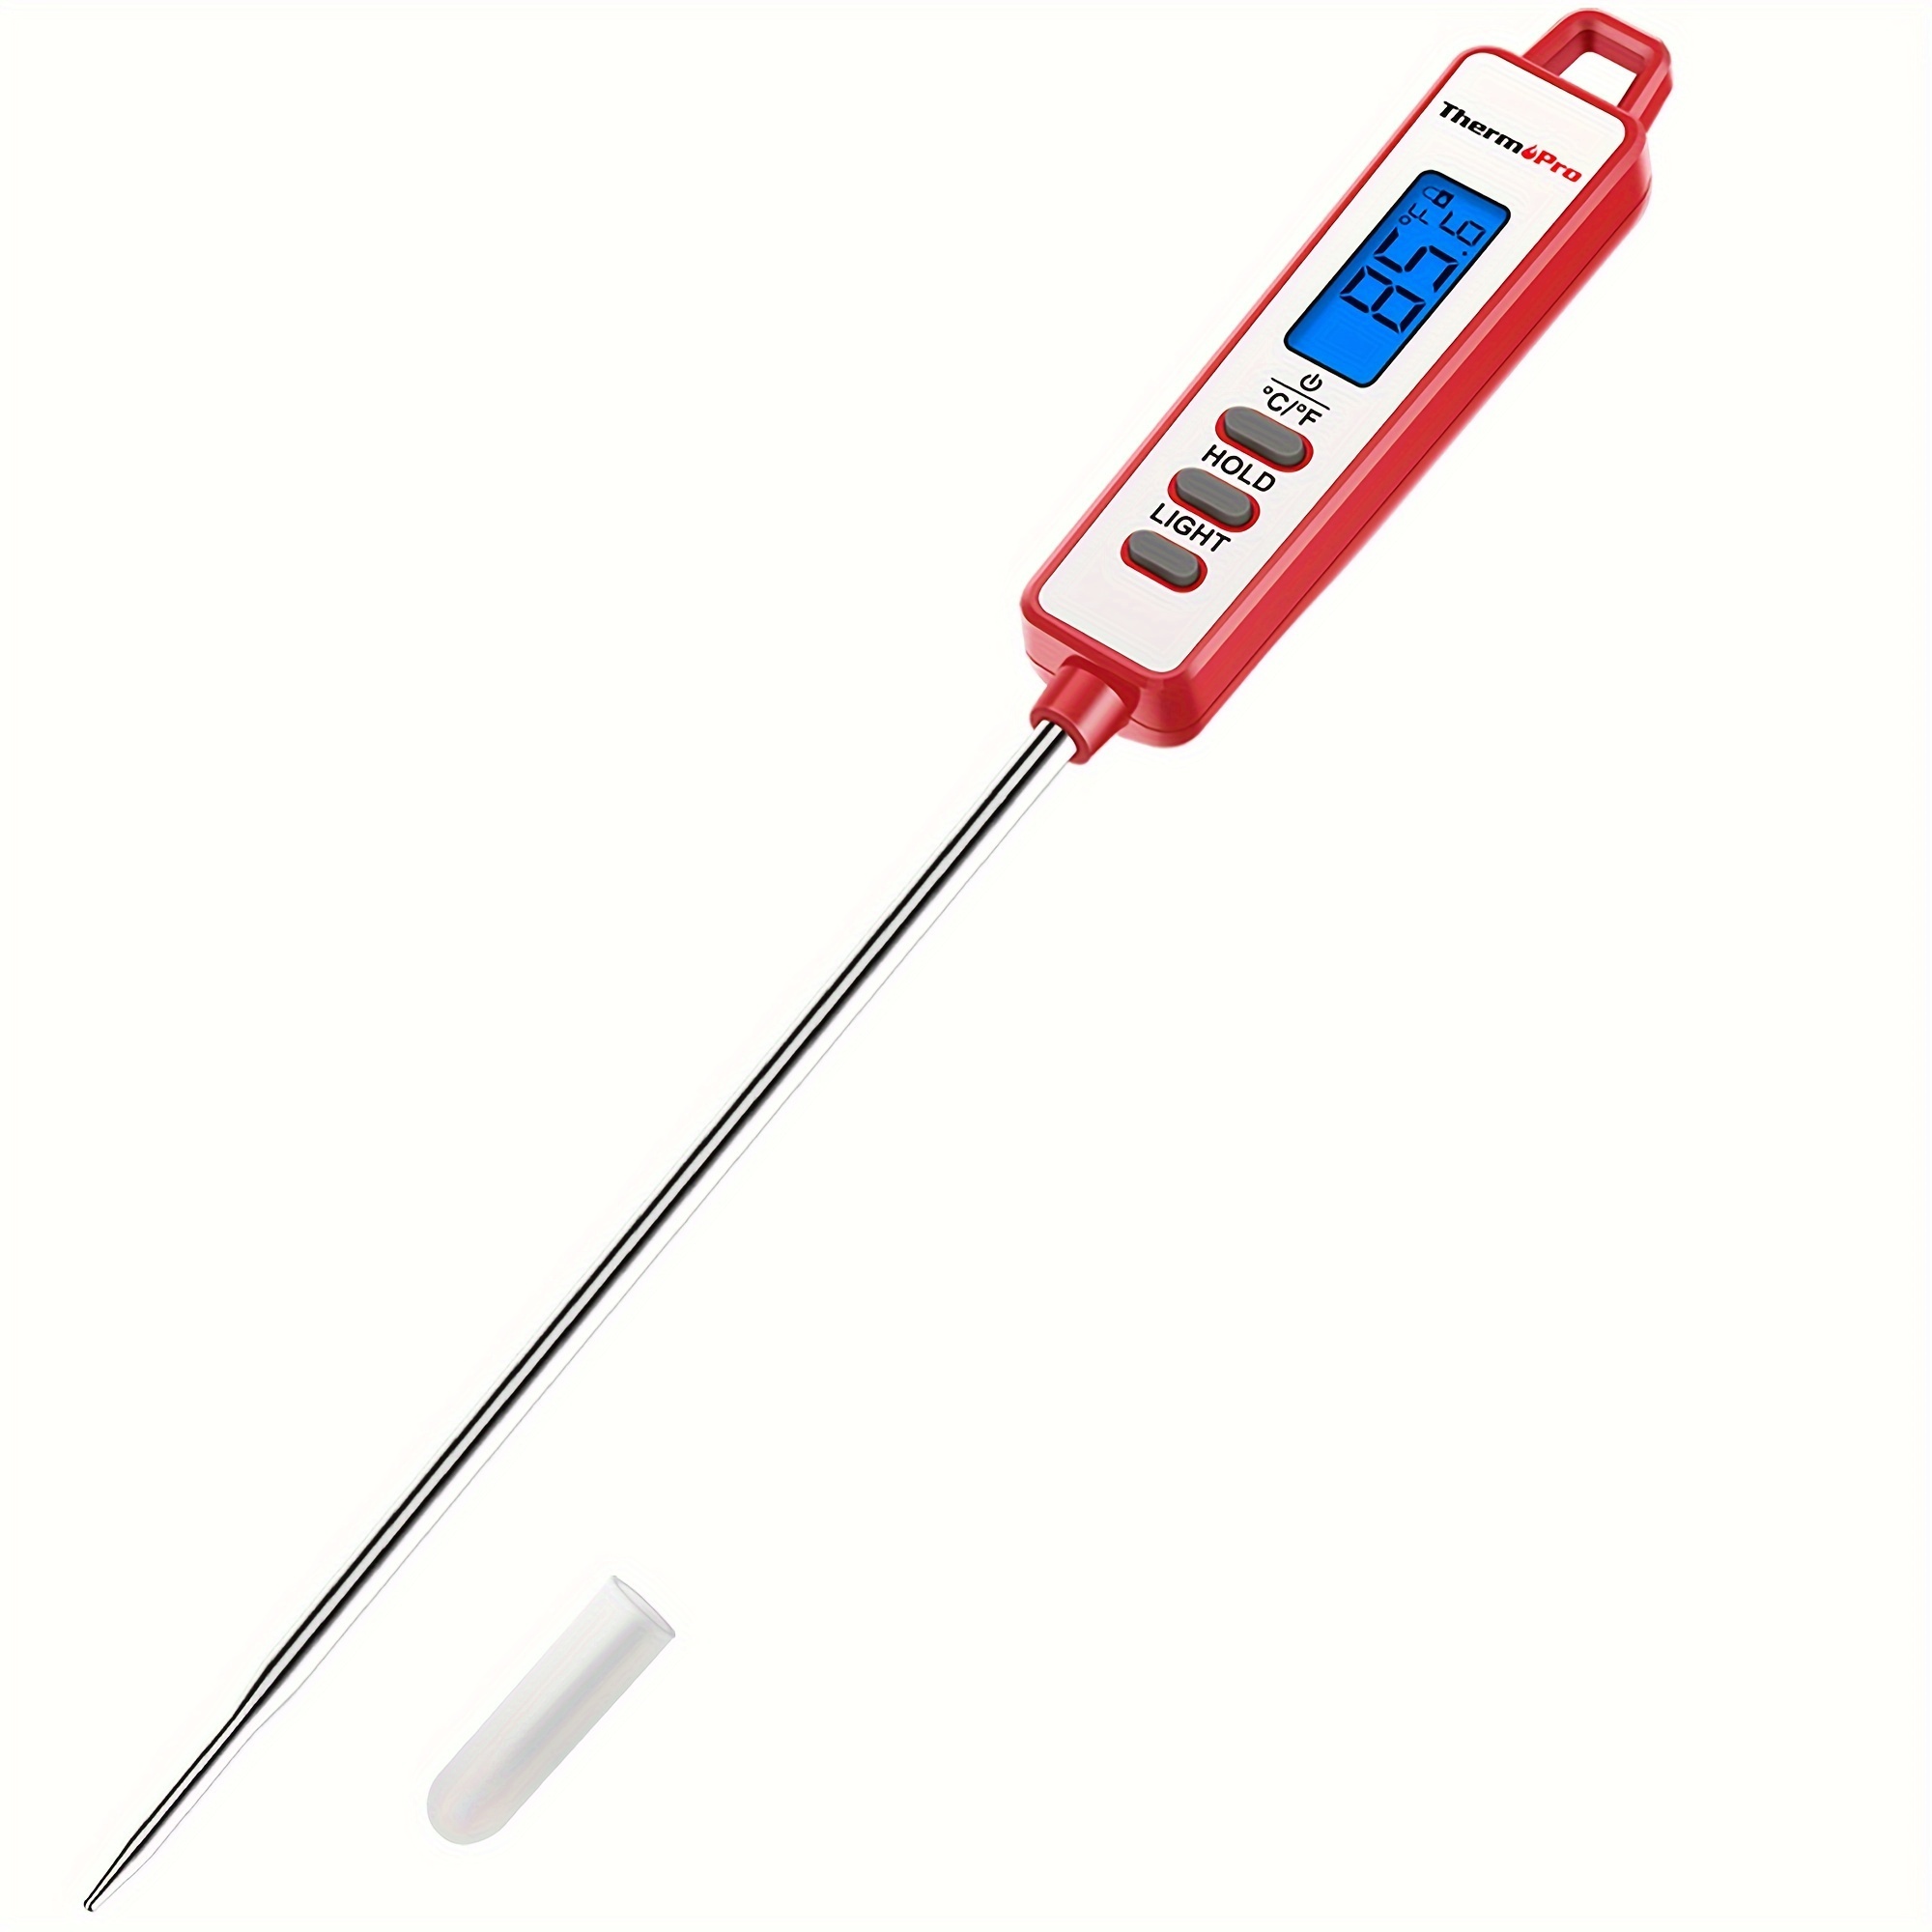 

1pc, Tp01aw Digital Meat Thermometer For Cooking Candle Liquid Deep Frying Oil Candy, Kitchen Food Instant Read Thermometer With Super Long Probe, Backlit, Lock Function